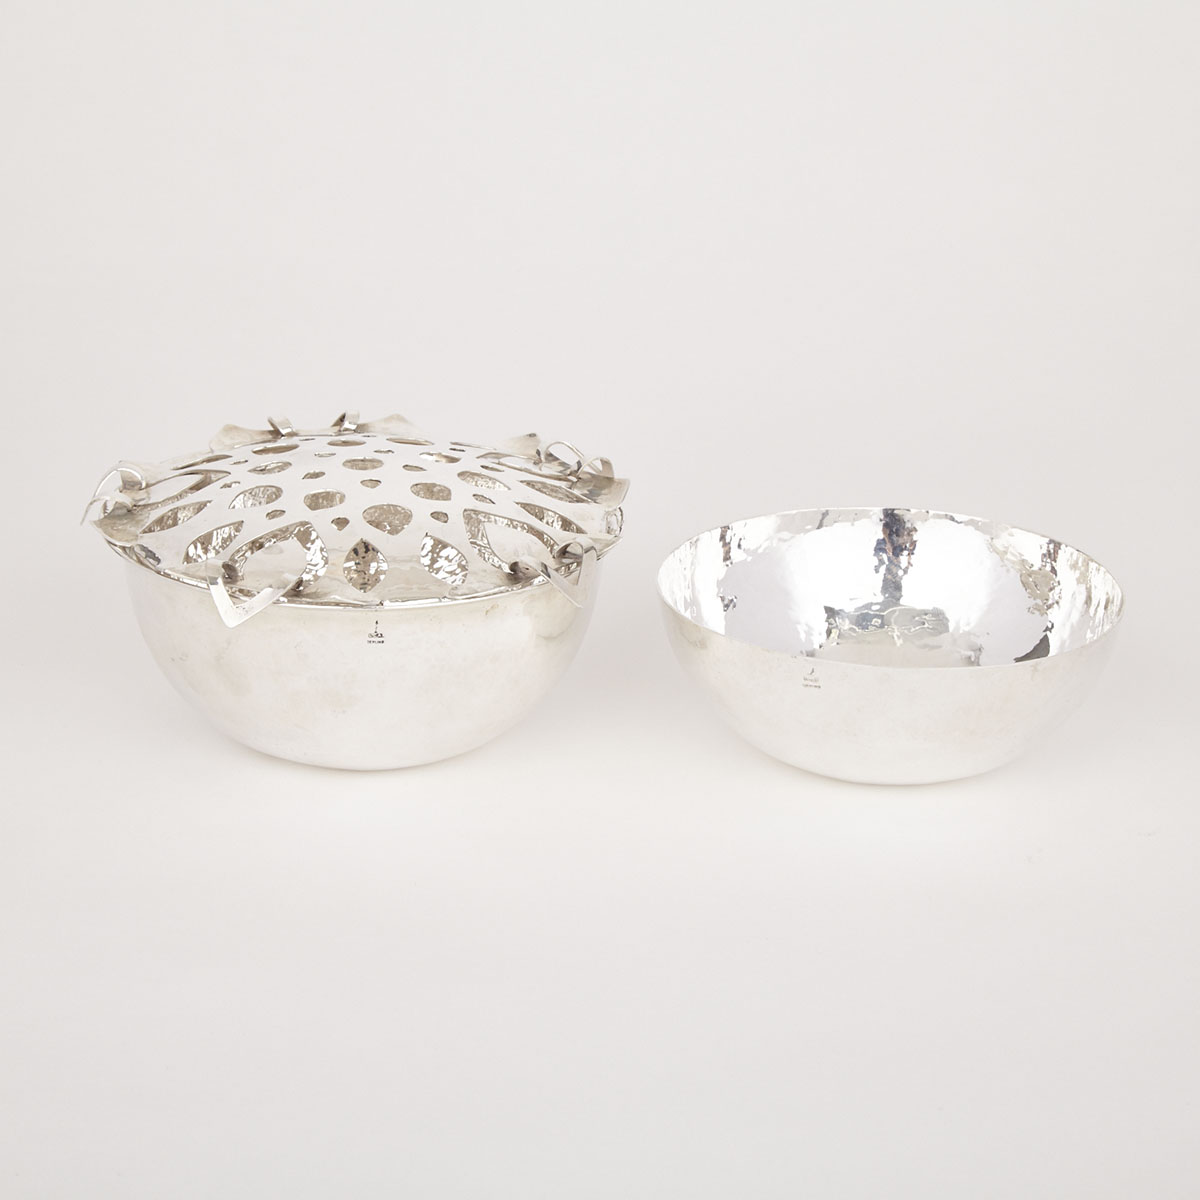 Canadian Silver Covered Potpourri, Lindsay Squire, Dalziel Designs, Toronto, Ont., modern